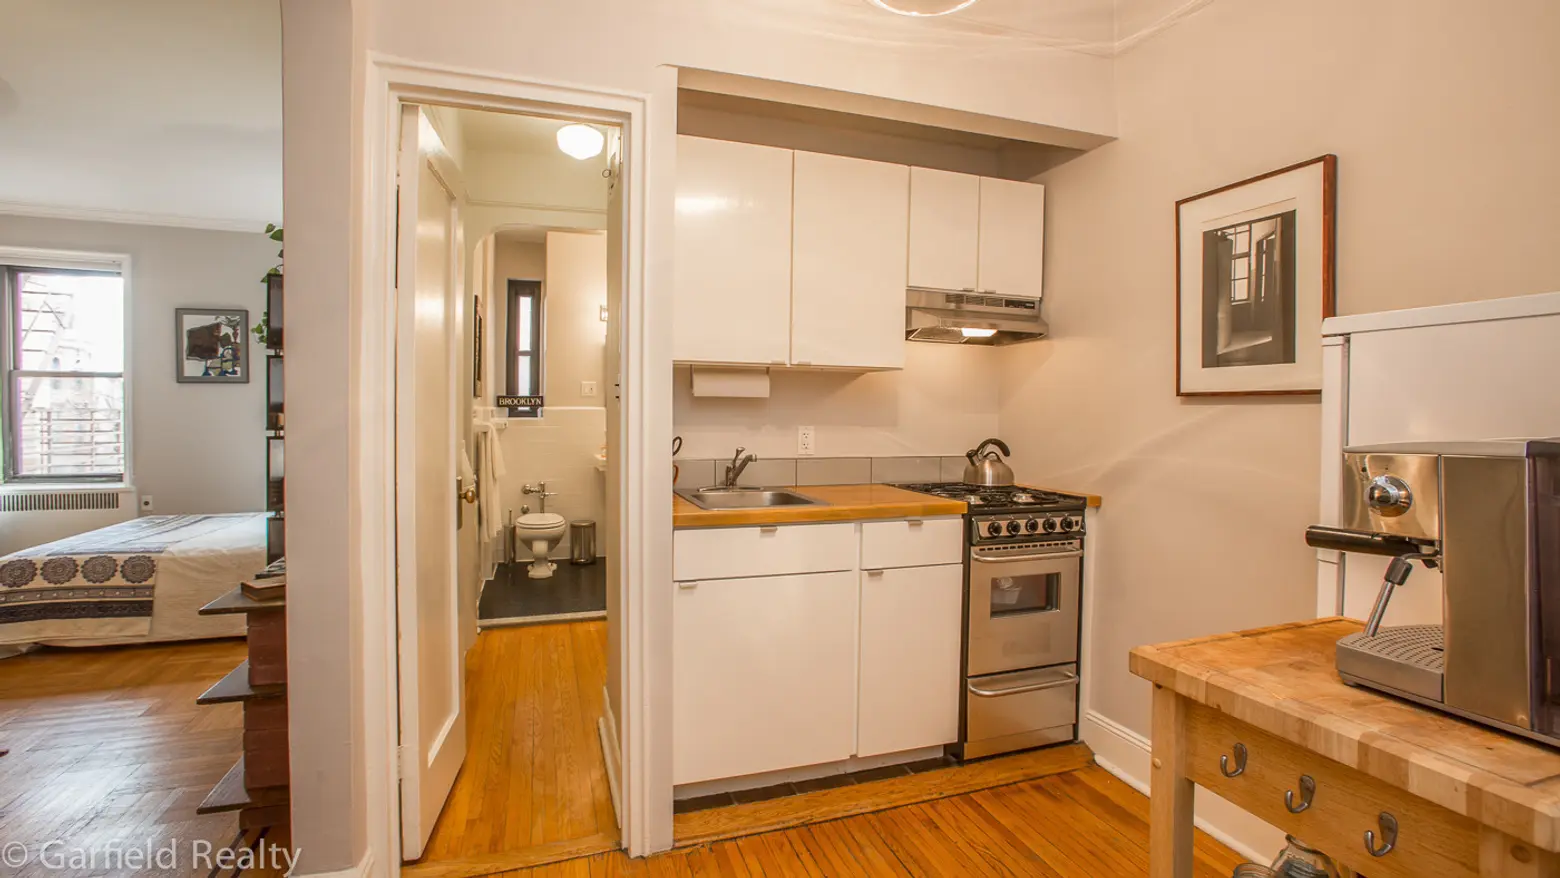 235 Lincoln Place, 20 Plaza Street East, Prospect Park, Prospect Heights, Brooklyn, Current Listings, co-op